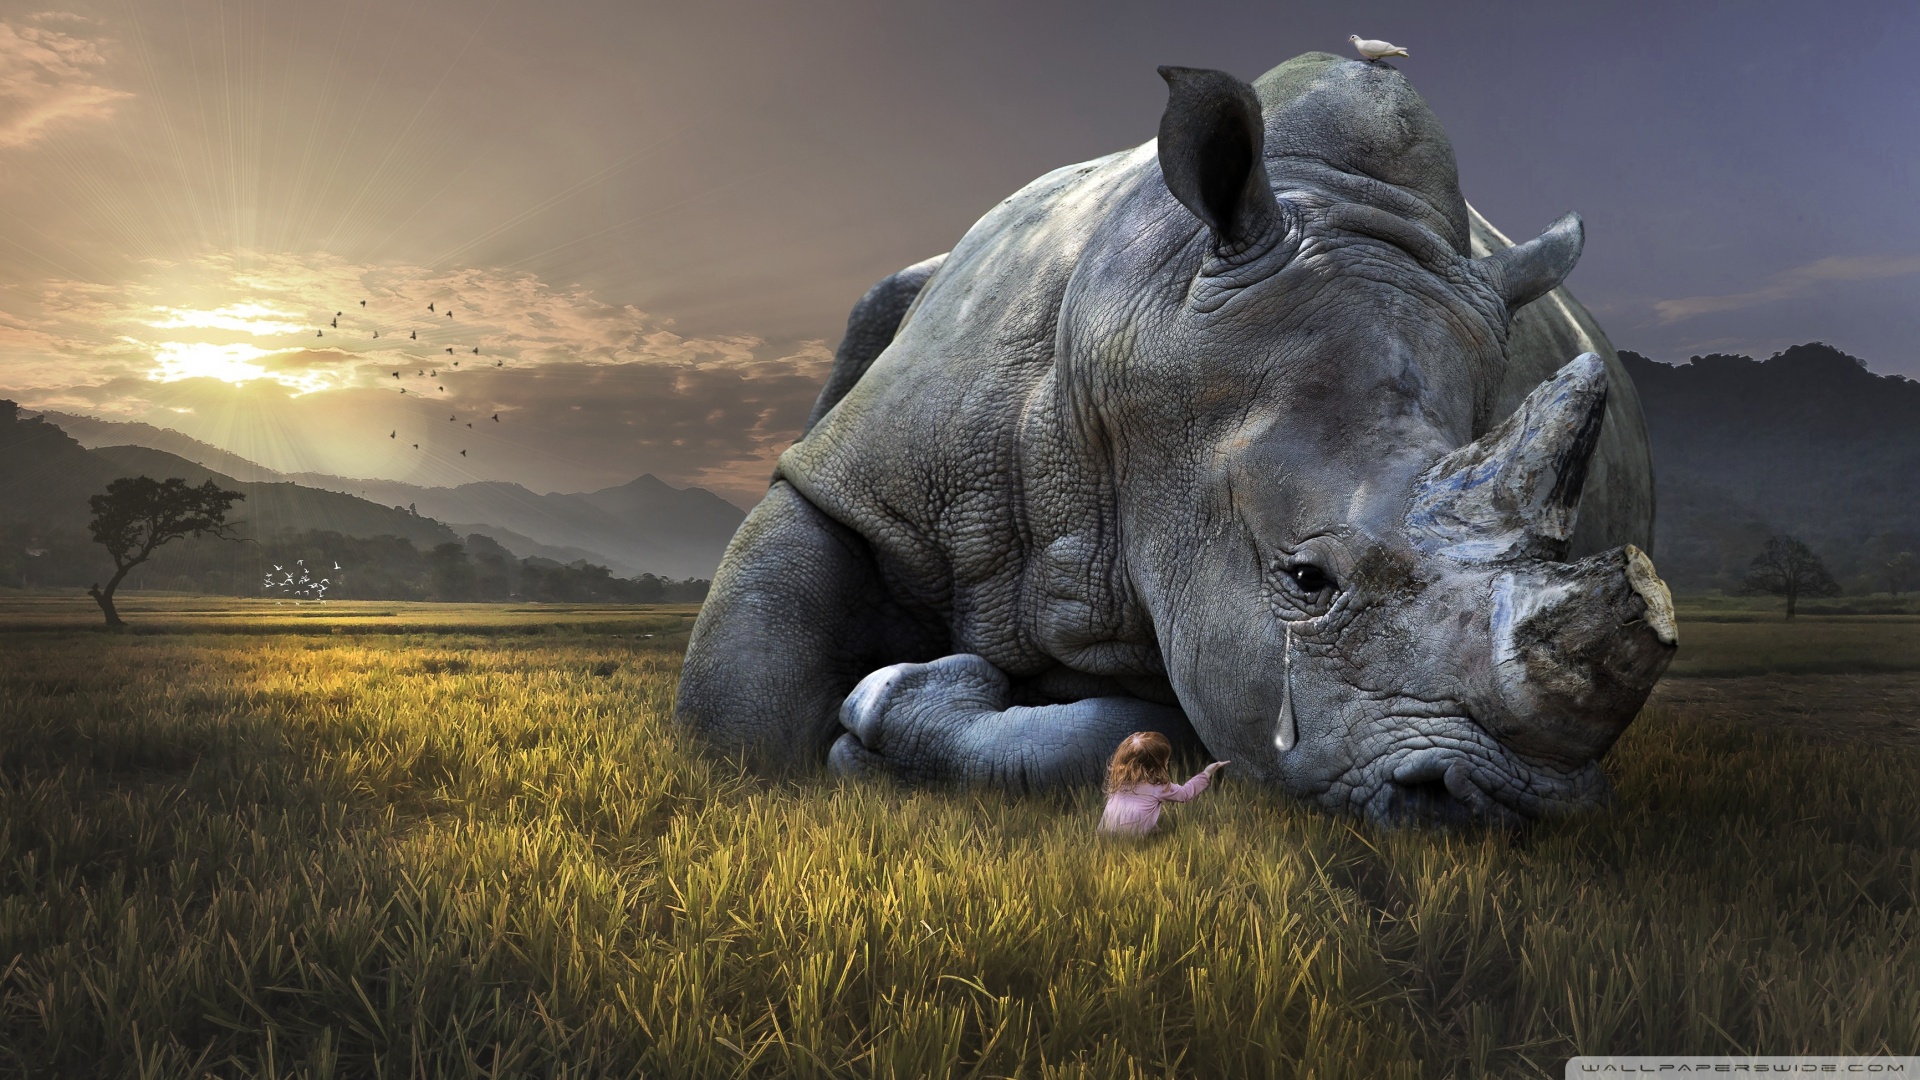 save_the_animals_save_the_earth-wallpaper-1920x1080.jpg